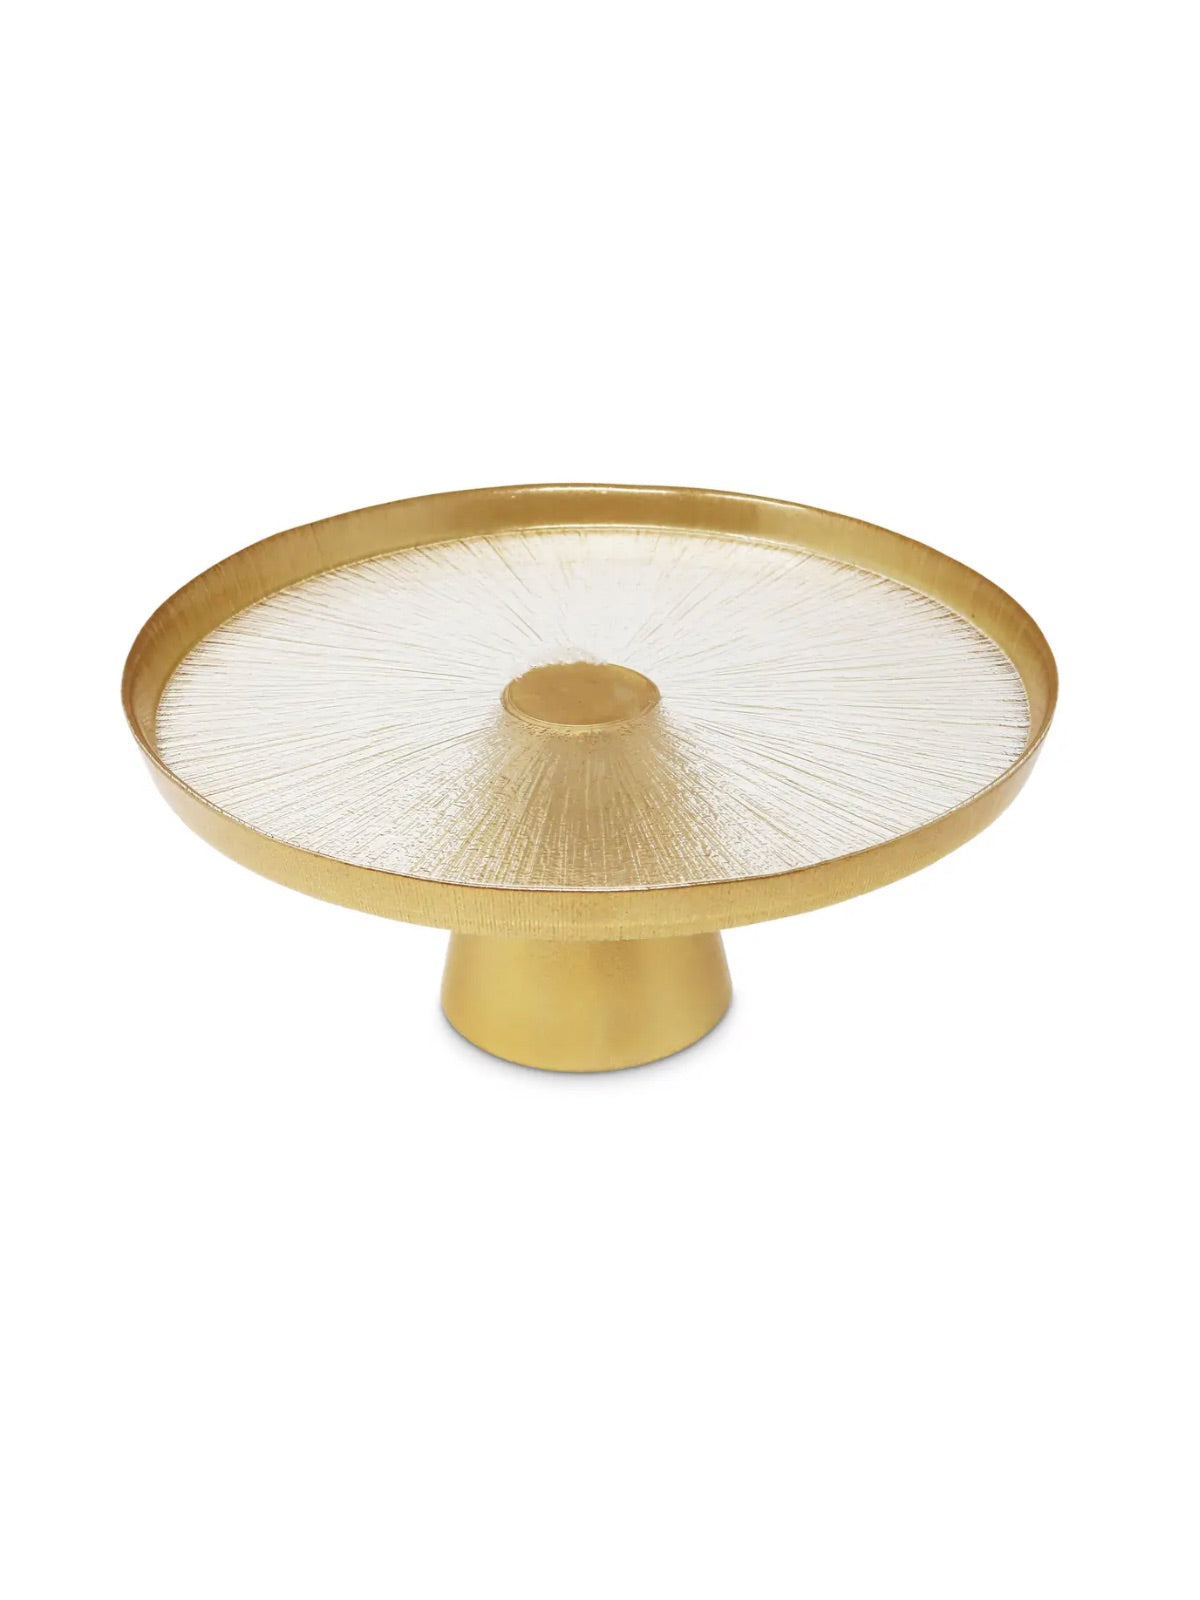 Glass Cake Plate with Gold Rim on Gold Base, Top View.